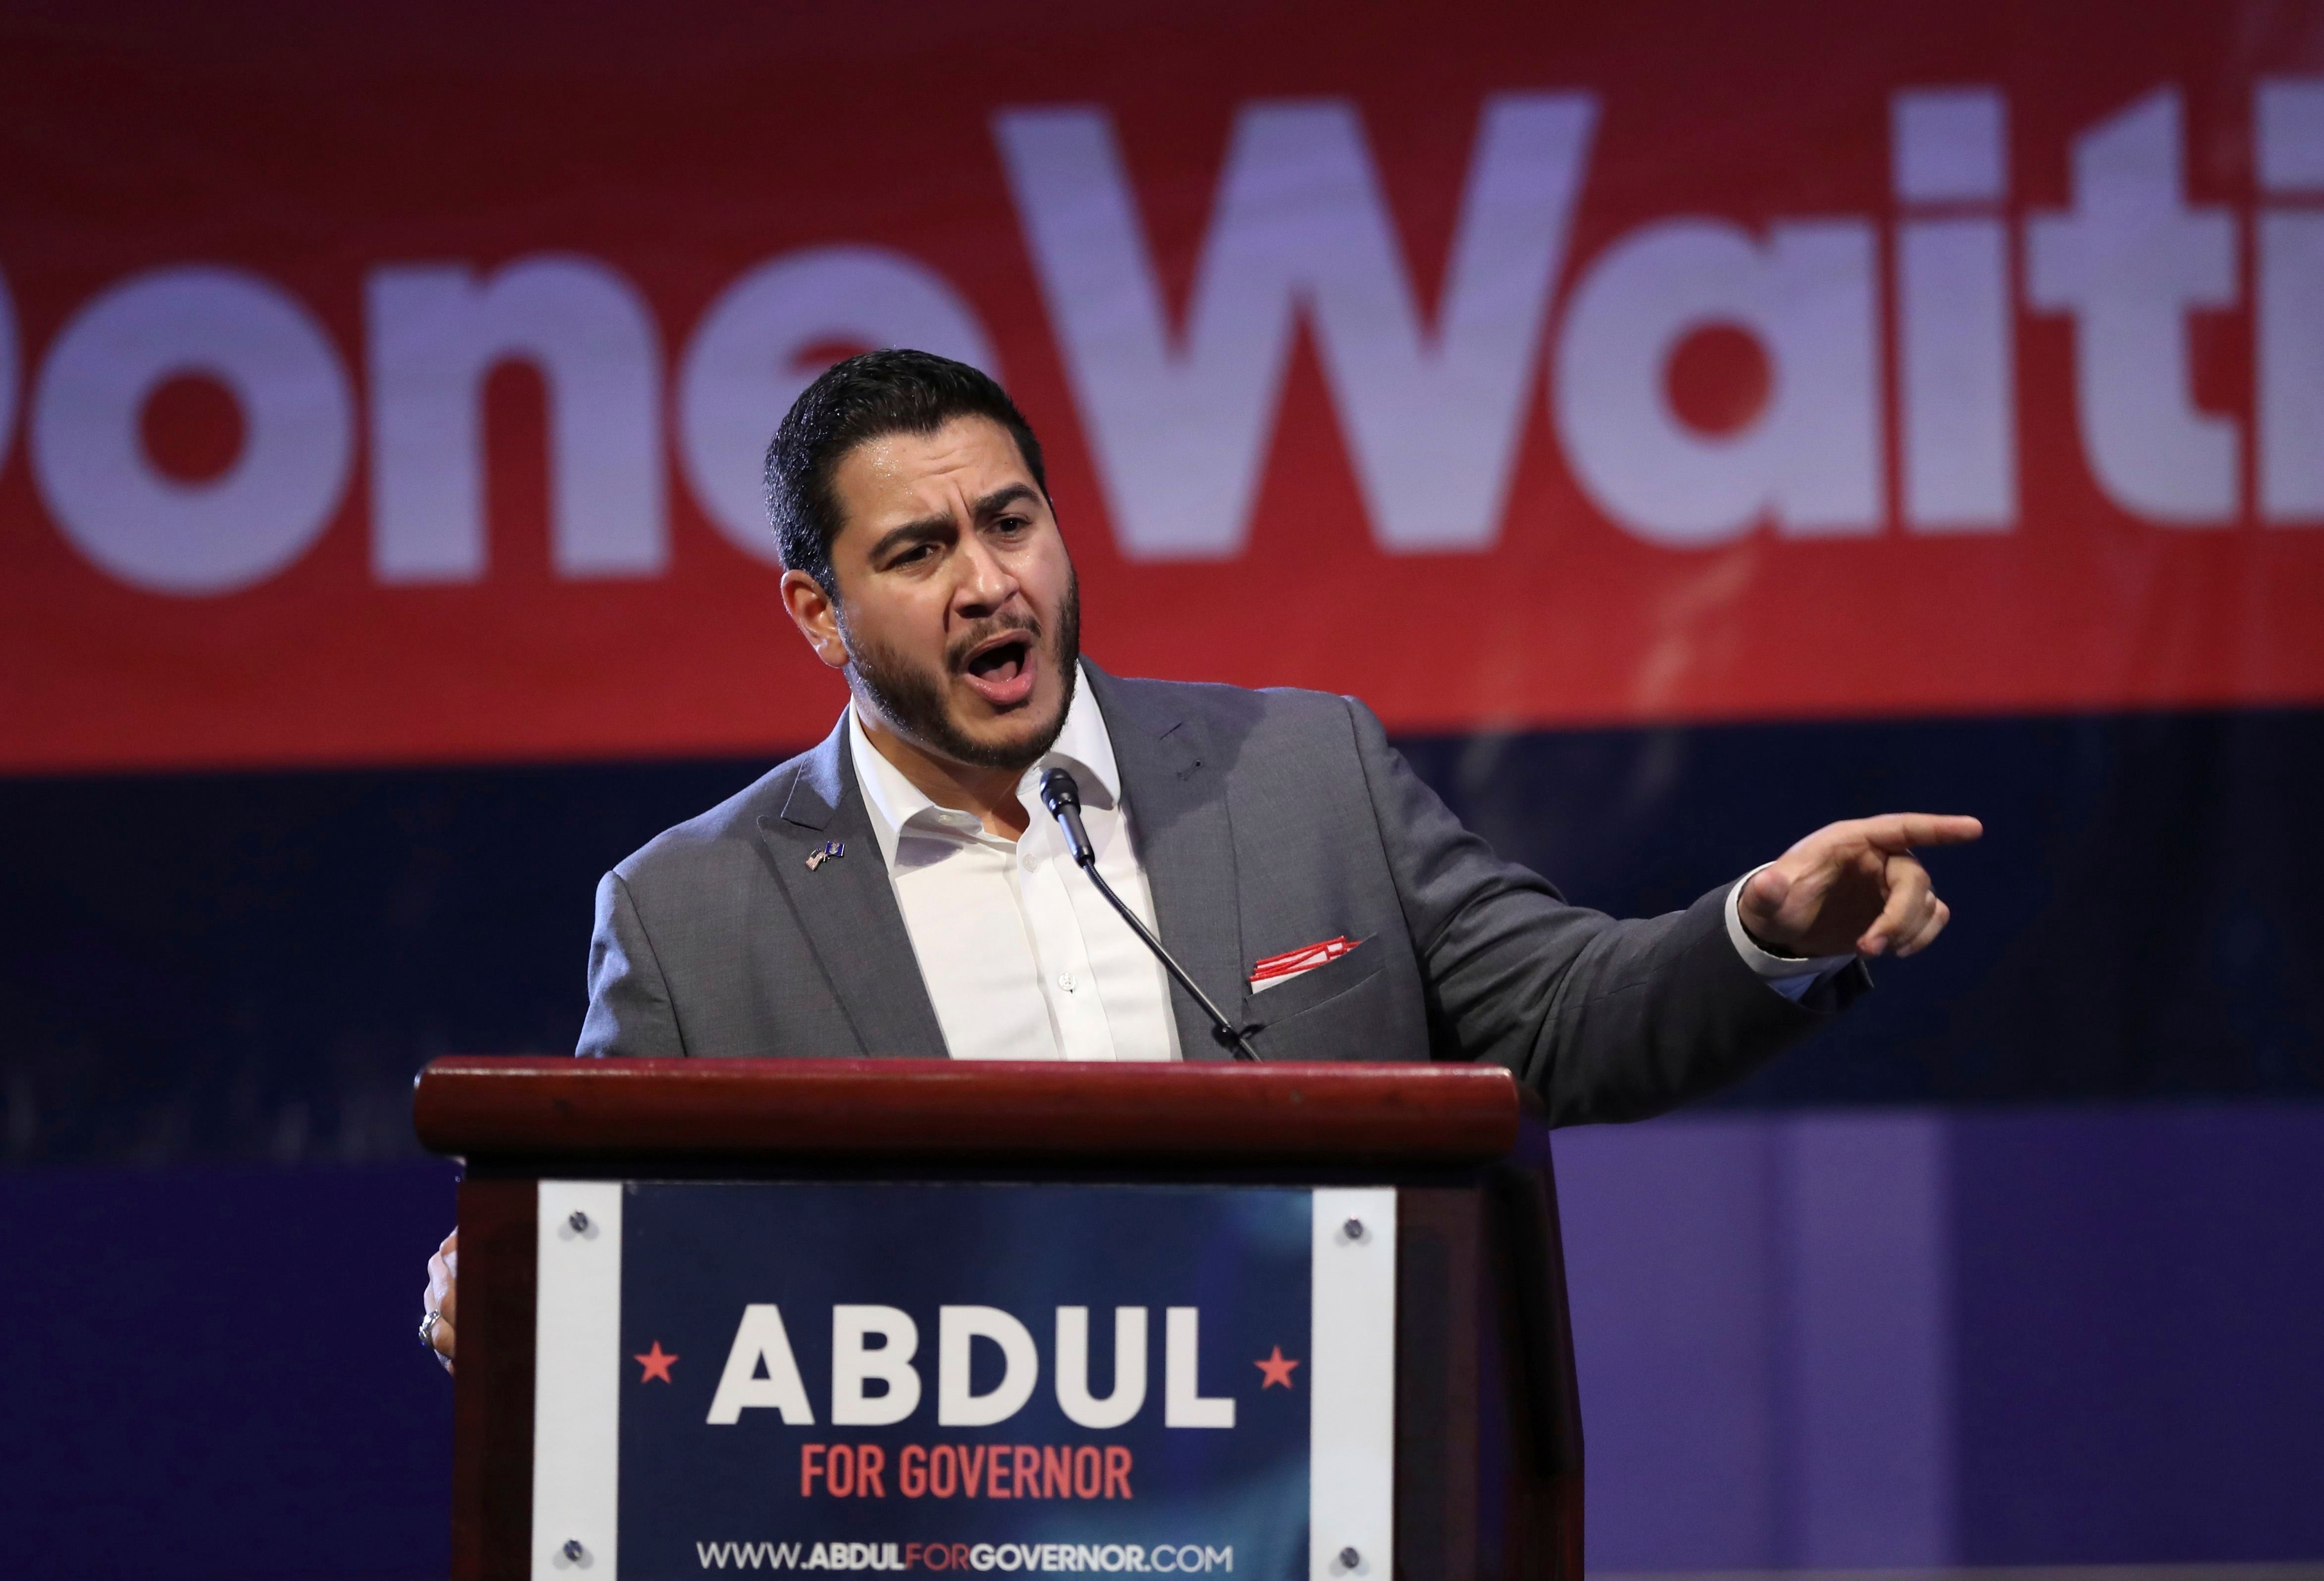 Michigan Democratic gubernatorial candidate Abdul El-Sayed addresses supporters during a rally, in Detroit
                      Michigan on August 5, 2018. (Carlos Osorio—AP/REX/Shutterstock)